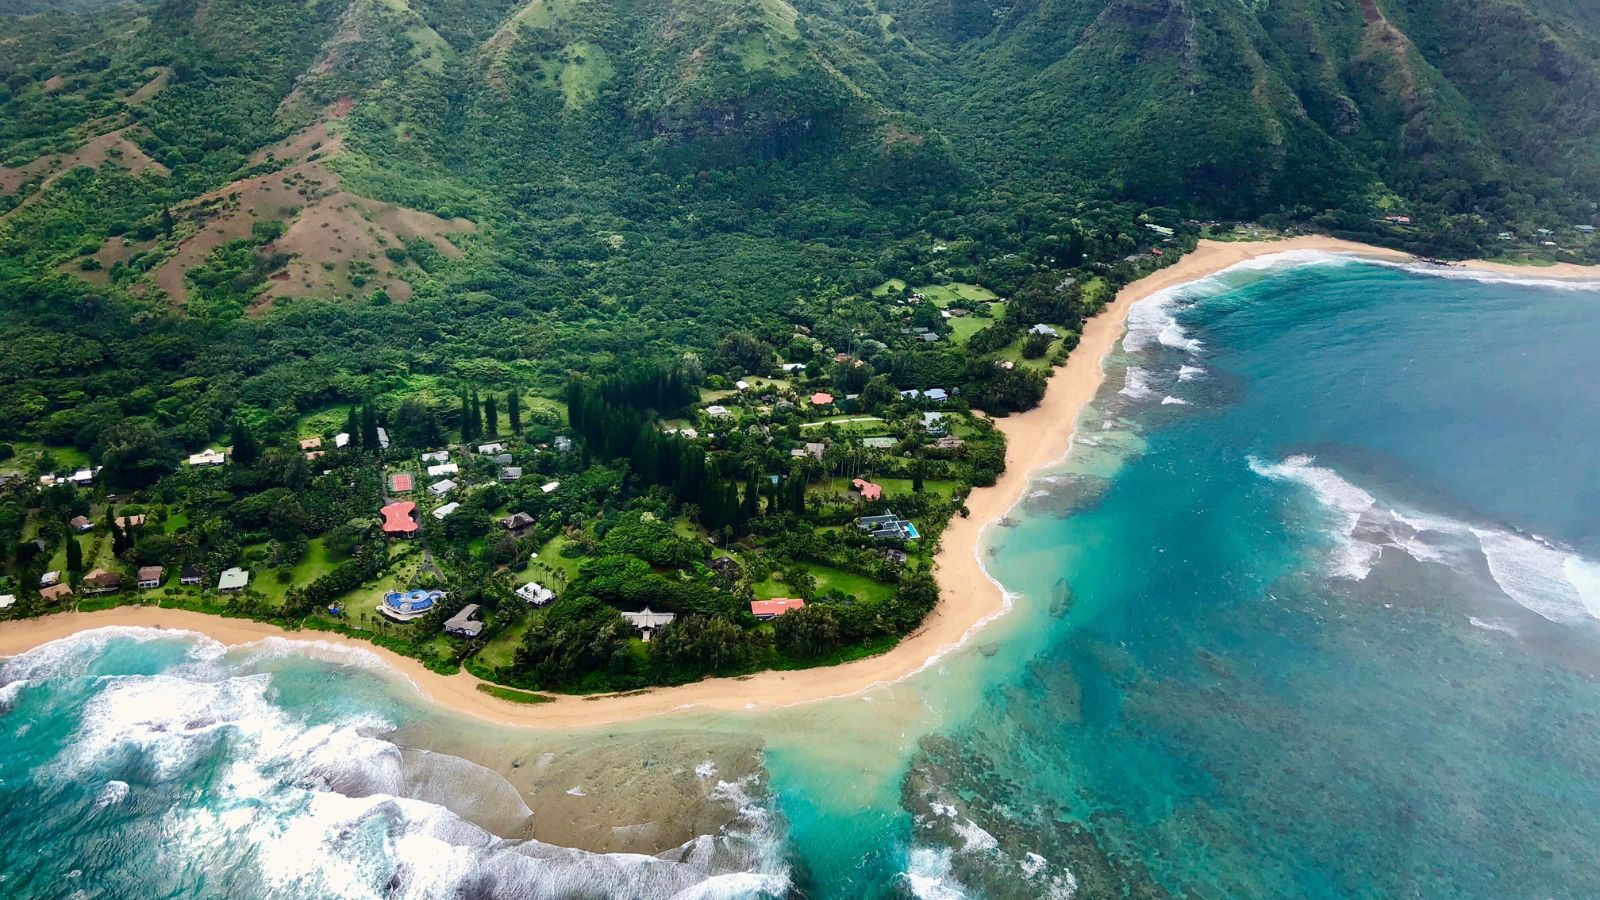 <p>Located in Kauai, Hanapepe is home to Salt Pond Beach Park, which has some incredible Hawaiian views. The area is full of green landscapes, which makes it a great place for hiking. The town has a relaxed feel, with plenty of outdoor activities and Hawaiian culture to indulge in. </p>